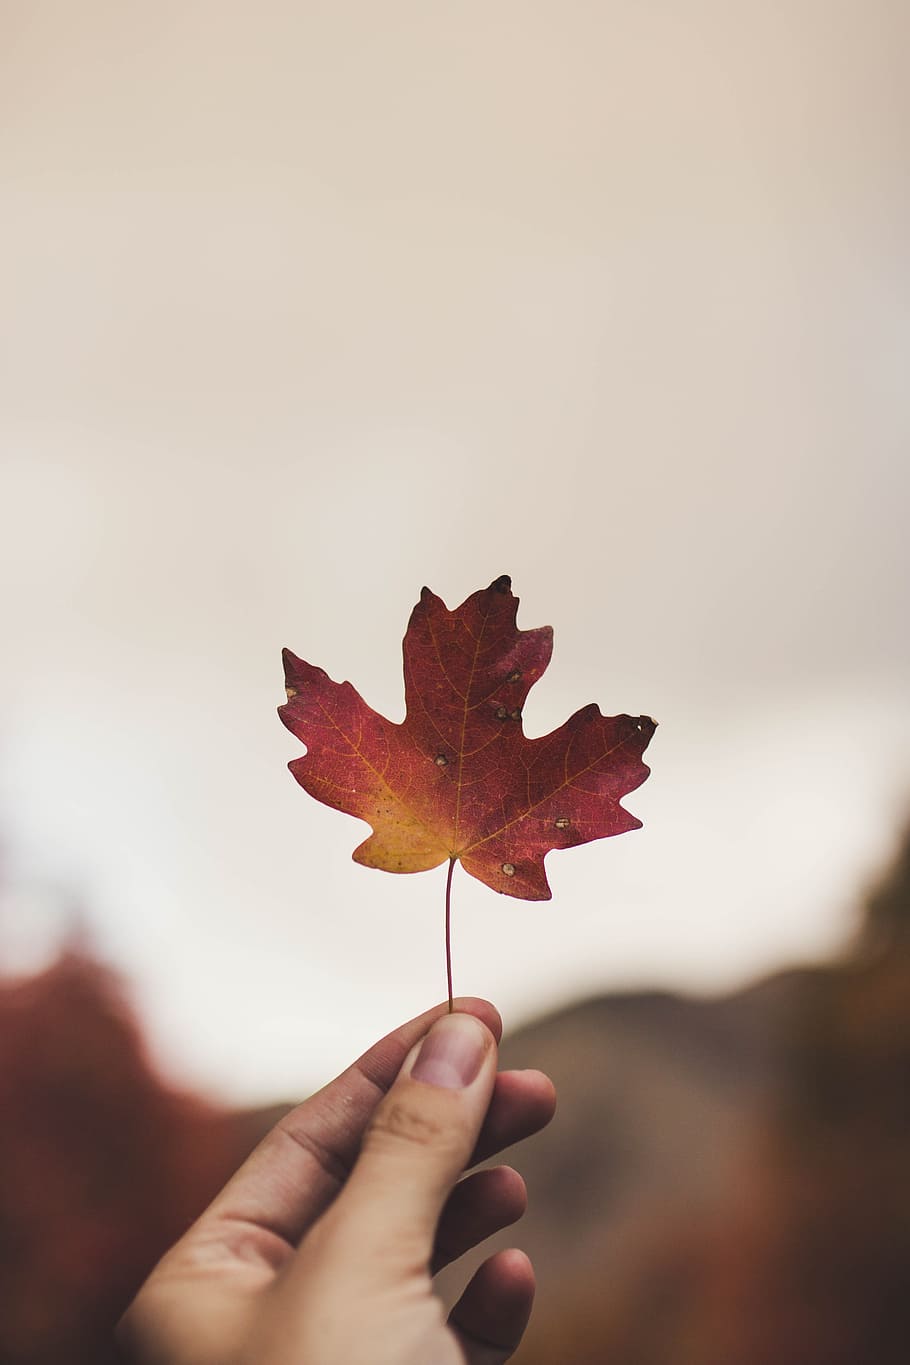 HD wallpaper: selective focus photography of person holding maple leaf